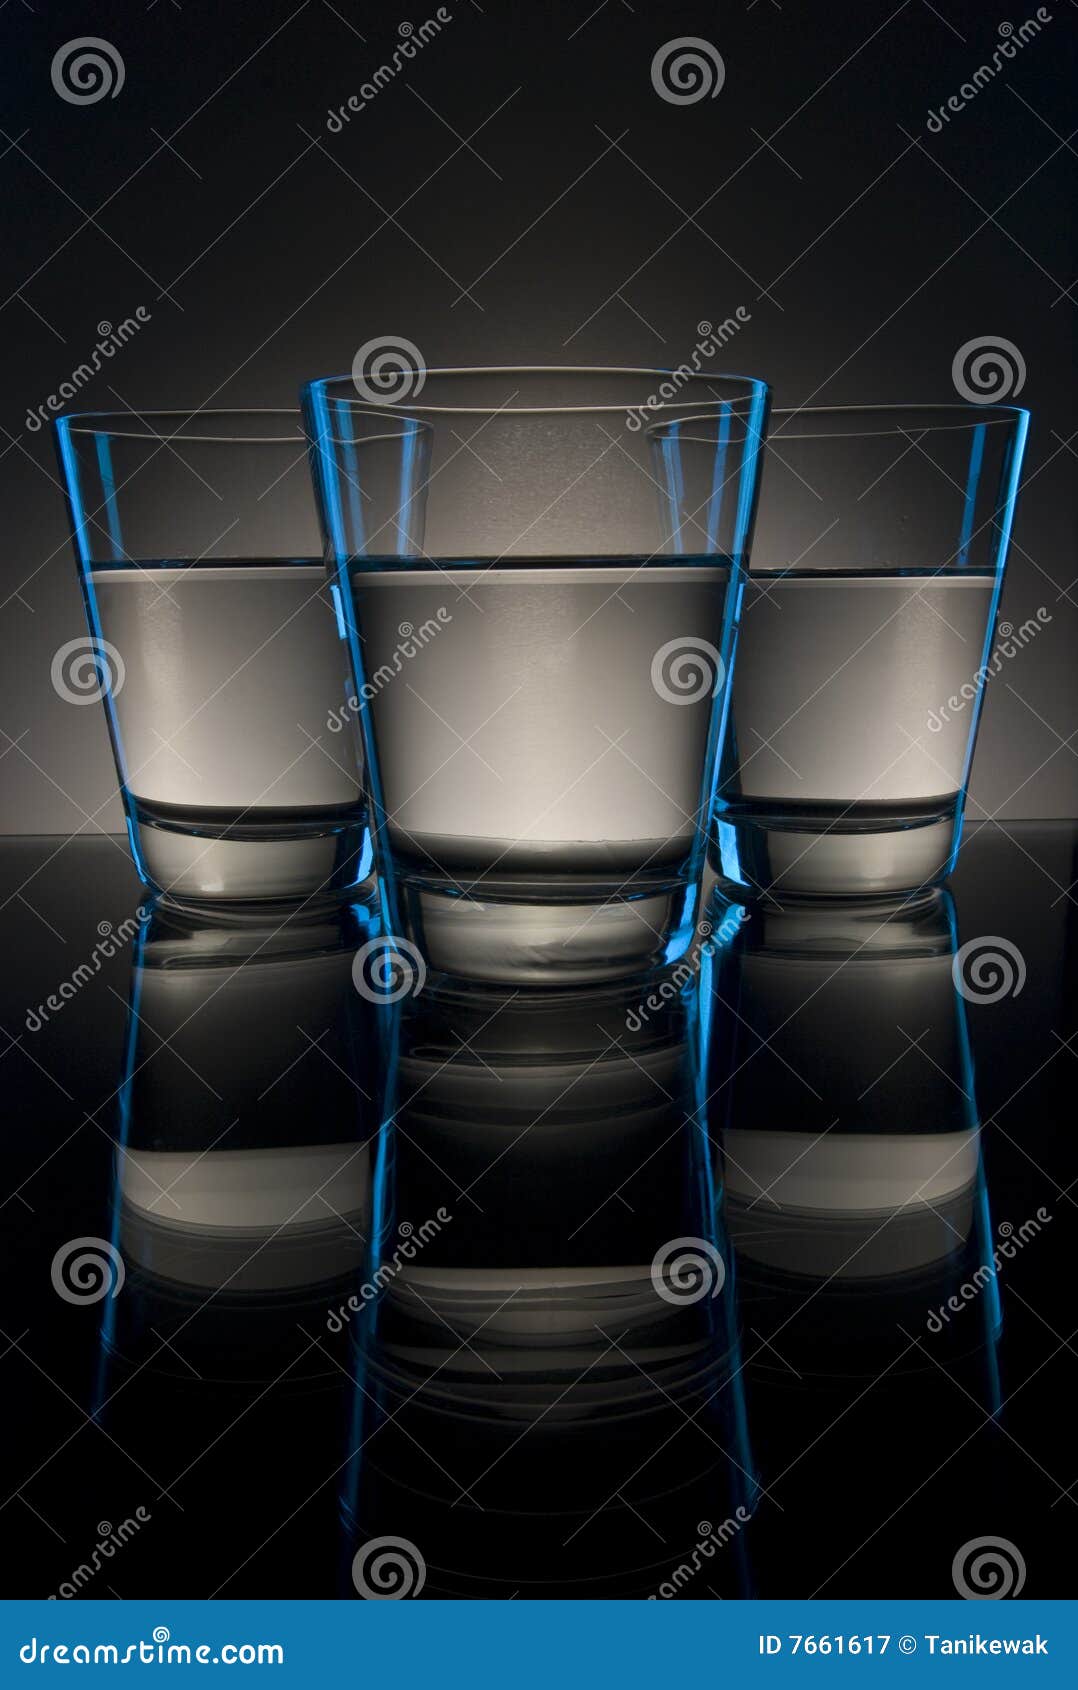 View of three glasses containing alcohol on a reflective surface.